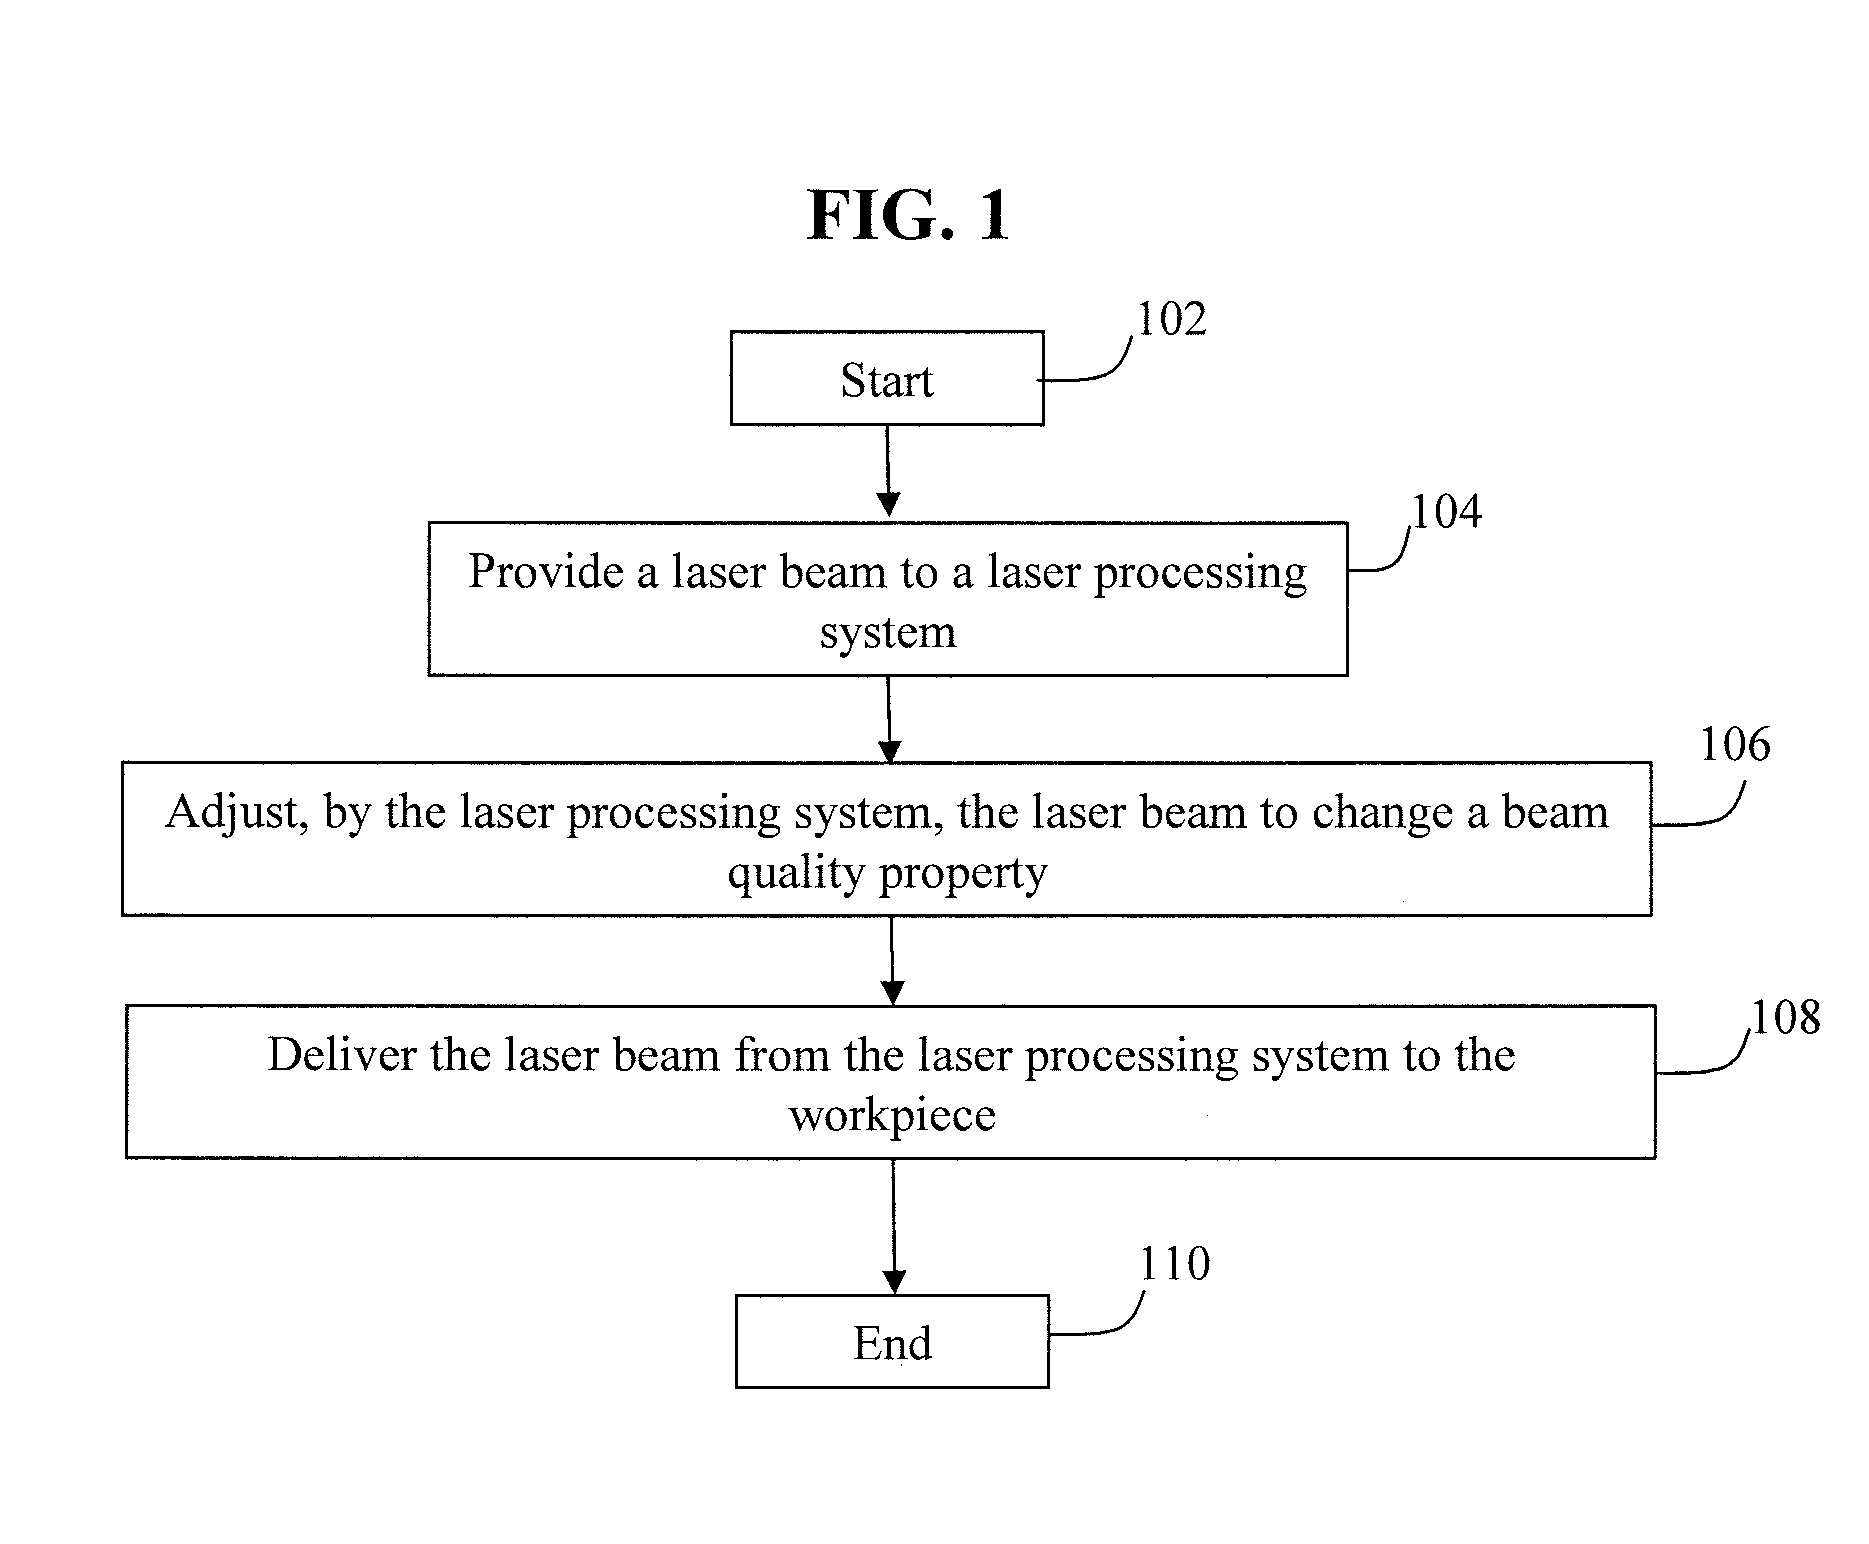 Optimization and control of beam quality for material processing